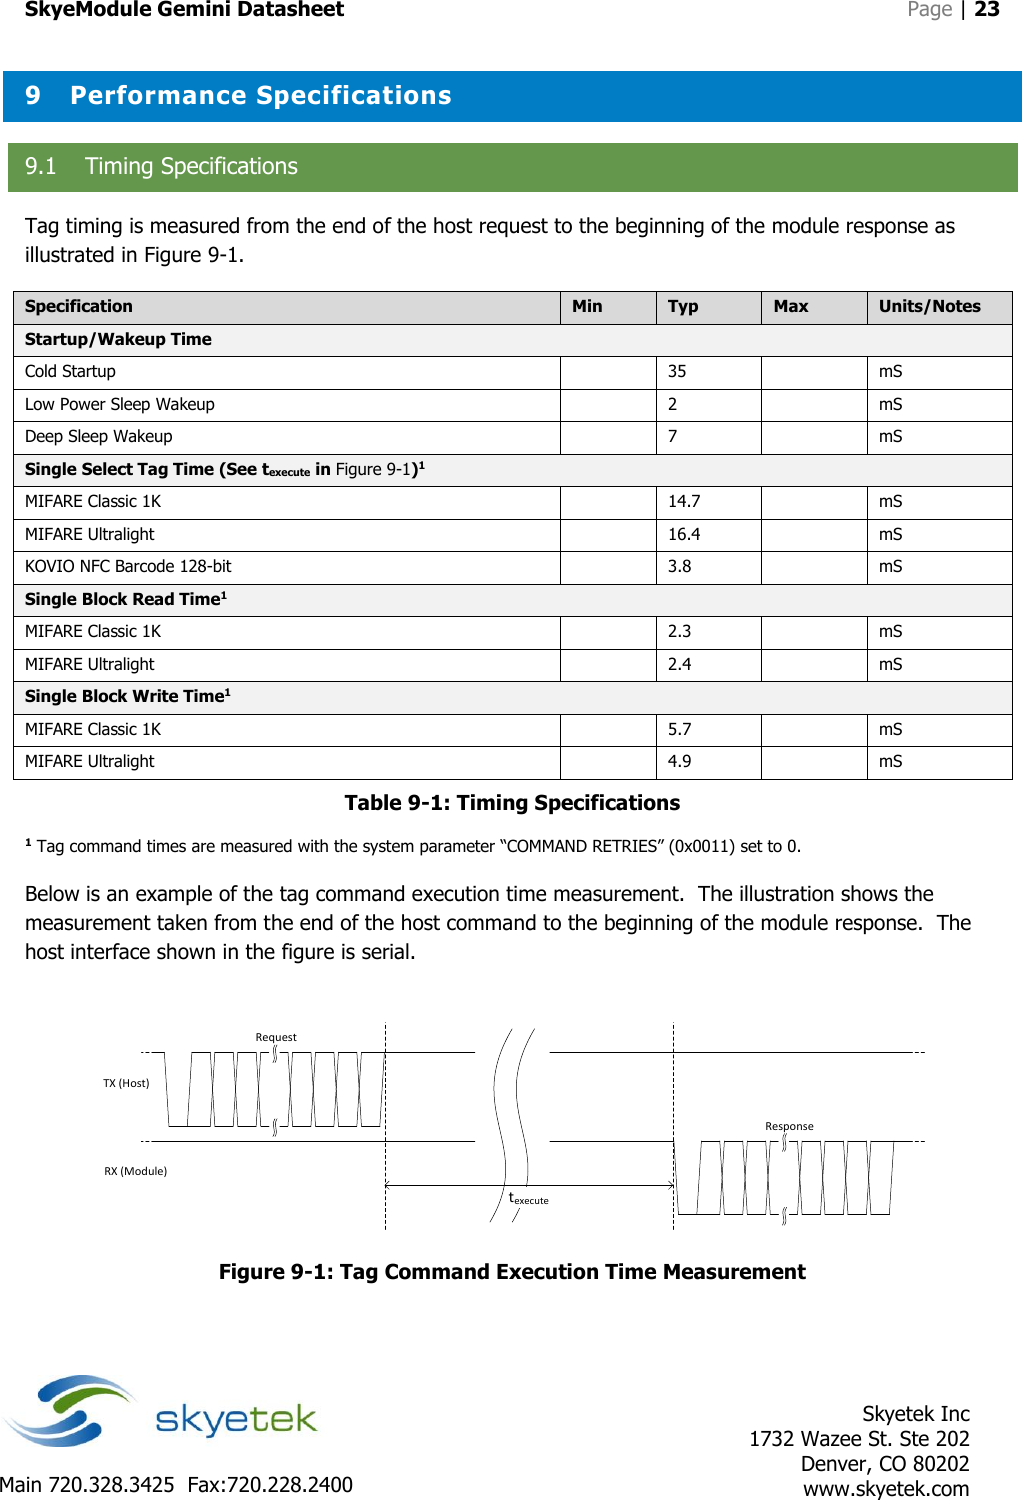 SkyeModule Gemini Datasheet   Page | 23    Skyetek Inc 1732 Wazee St. Ste 202 Denver, CO 80202 www.skyetek.com Main 720.328.3425  Fax:720.228.2400  9 Performance Specifications 9.1 Timing Specifications Tag timing is measured from the end of the host request to the beginning of the module response as illustrated in Figure 9-1. Specification Min Typ Max Units/Notes Startup/Wakeup Time Cold Startup  35  mS Low Power Sleep Wakeup   2  mS Deep Sleep Wakeup  7  mS Single Select Tag Time (See texecute in Figure 9-1)1 MIFARE Classic 1K  14.7  mS MIFARE Ultralight  16.4  mS KOVIO NFC Barcode 128-bit  3.8  mS Single Block Read Time1 MIFARE Classic 1K  2.3  mS MIFARE Ultralight  2.4  mS Single Block Write Time1 MIFARE Classic 1K  5.7  mS MIFARE Ultralight  4.9  mS Table 9-1: Timing Specifications 1 Tag command times are measured with the system parameter “COMMAND RETRIES” (0x0011) set to 0. Below is an example of the tag command execution time measurement.  The illustration shows the measurement taken from the end of the host command to the beginning of the module response.  The host interface shown in the figure is serial.  TX (Host)RX (Module)texecuteRequestResponse Figure 9-1: Tag Command Execution Time Measurement    